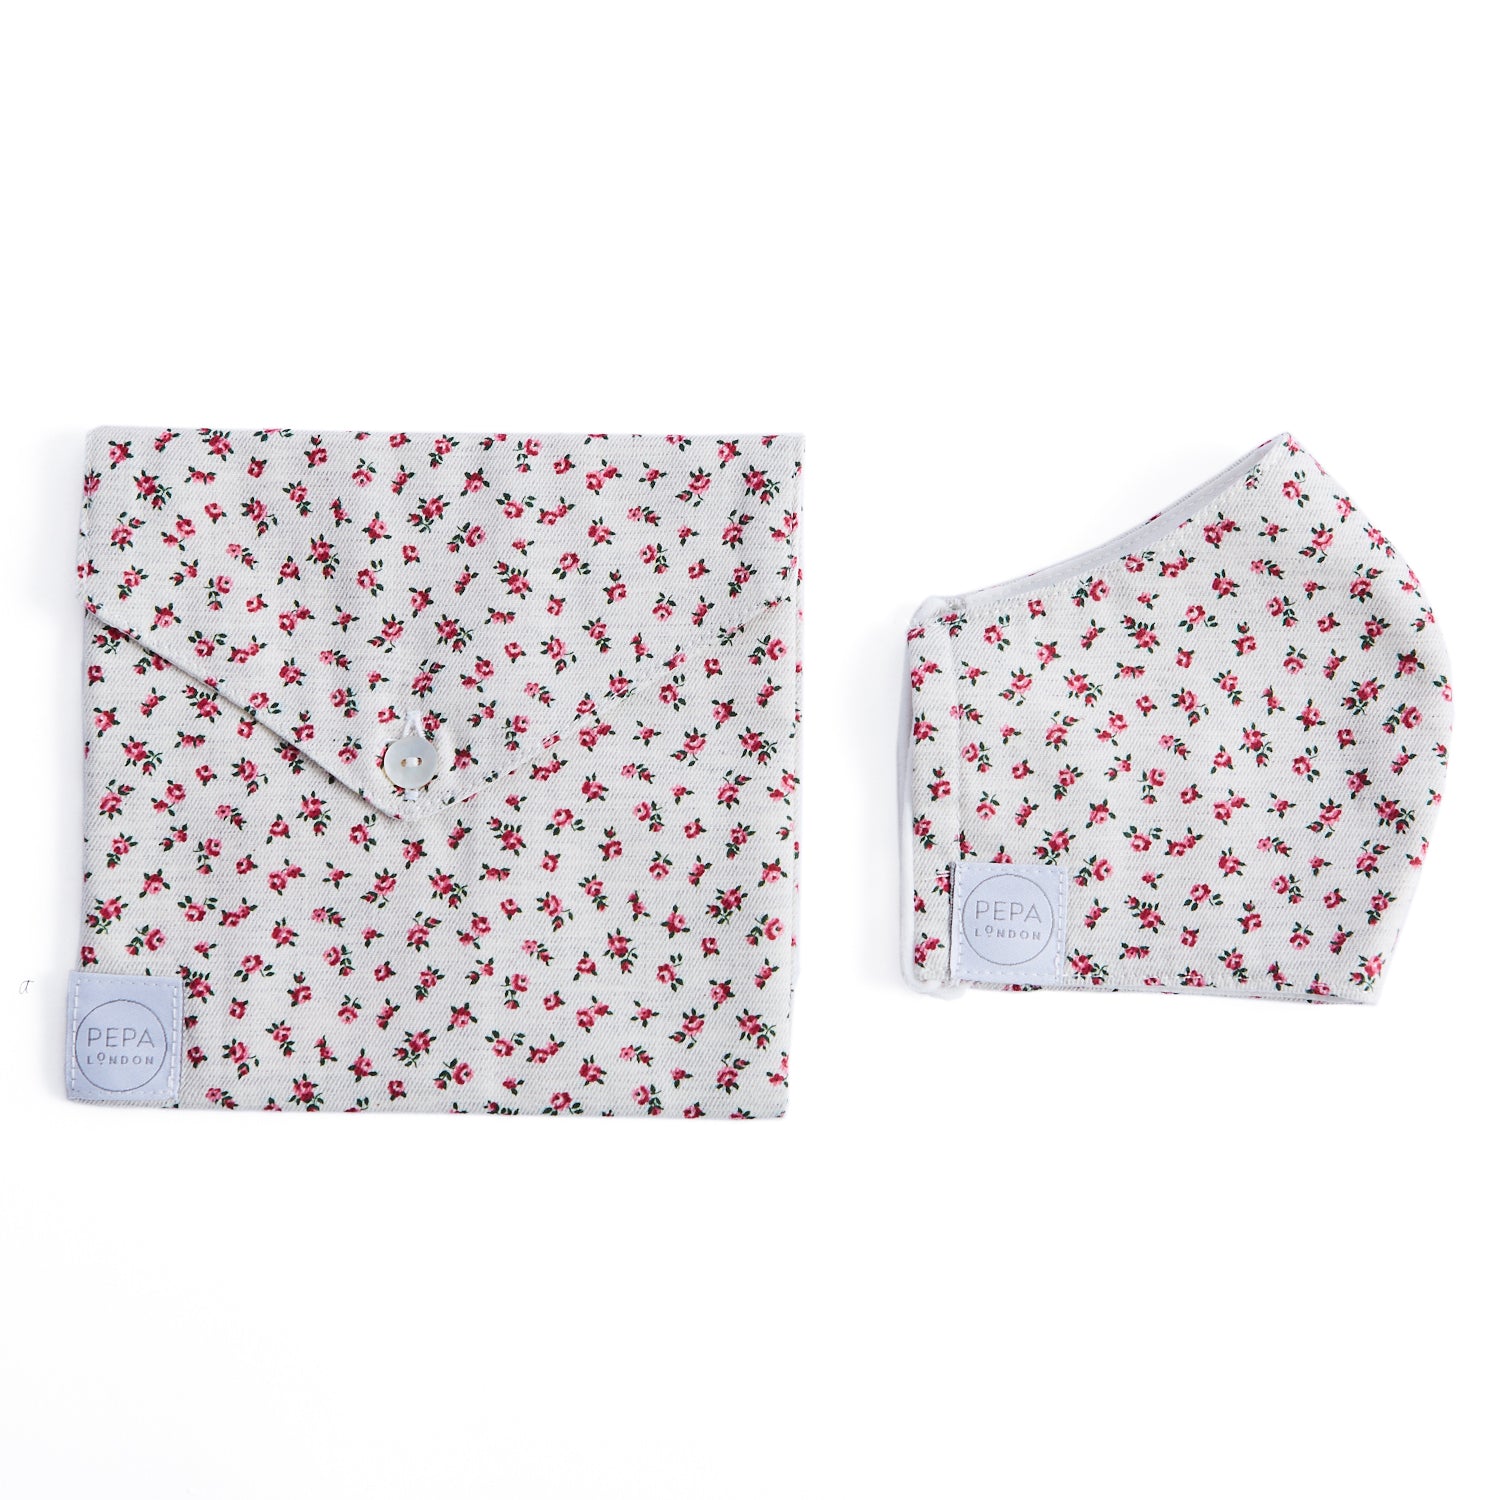 Grey Floral Face Mask with Pouch Accessories  from Pepa London